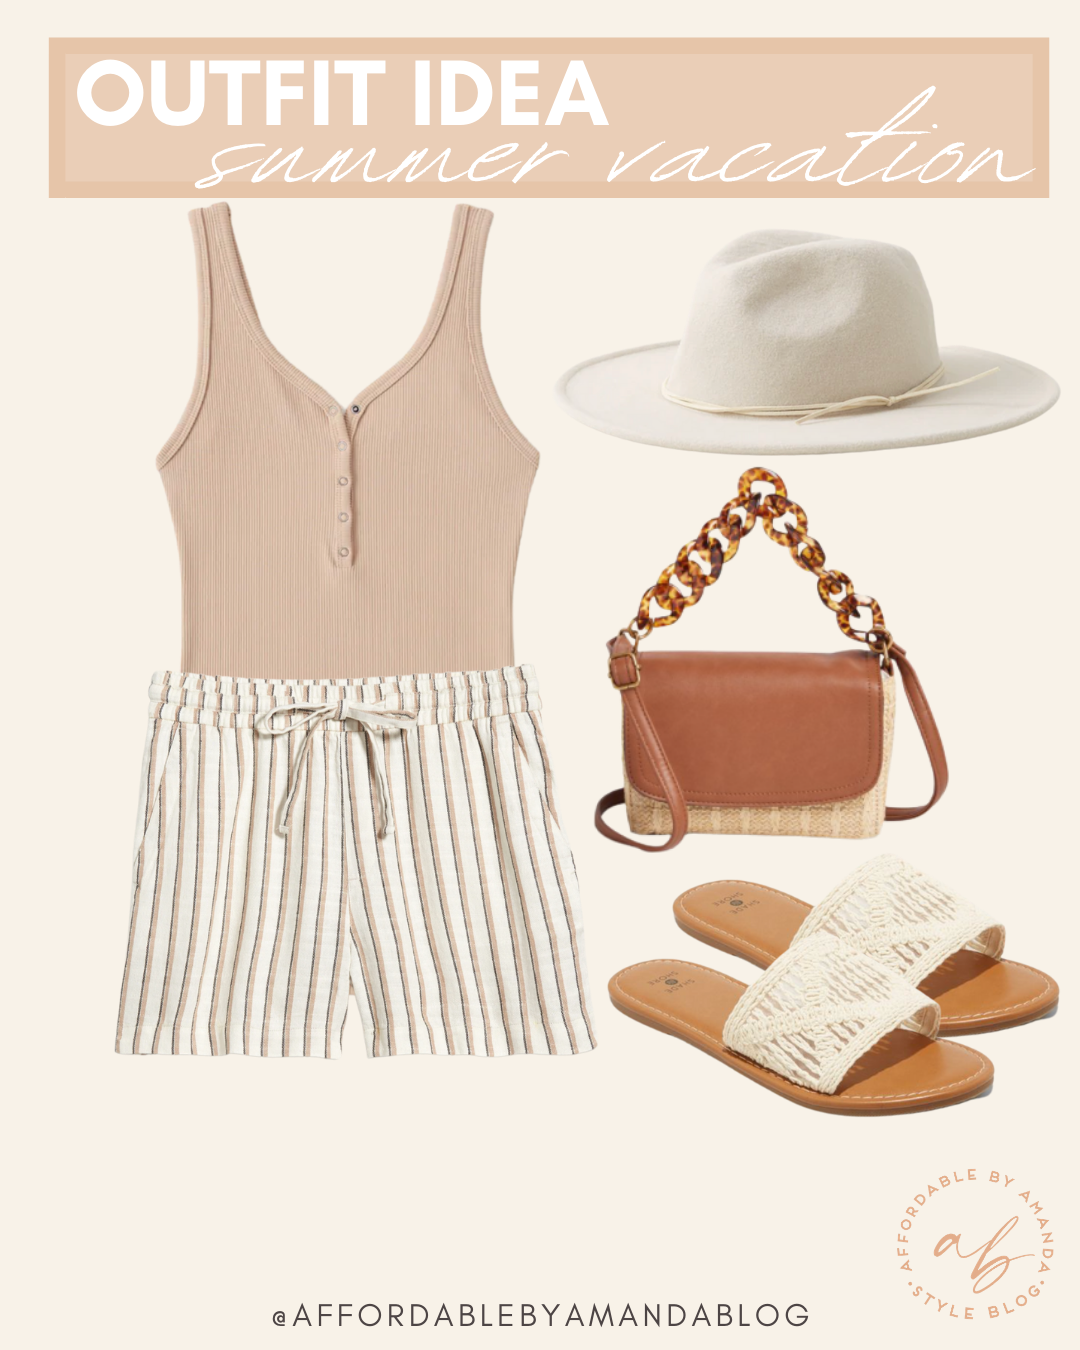 Outfit Idea - Summer Vacation - What To Wear In Hot Weather - Summer Outfit Ideas 2021 - Affordable by Amanda